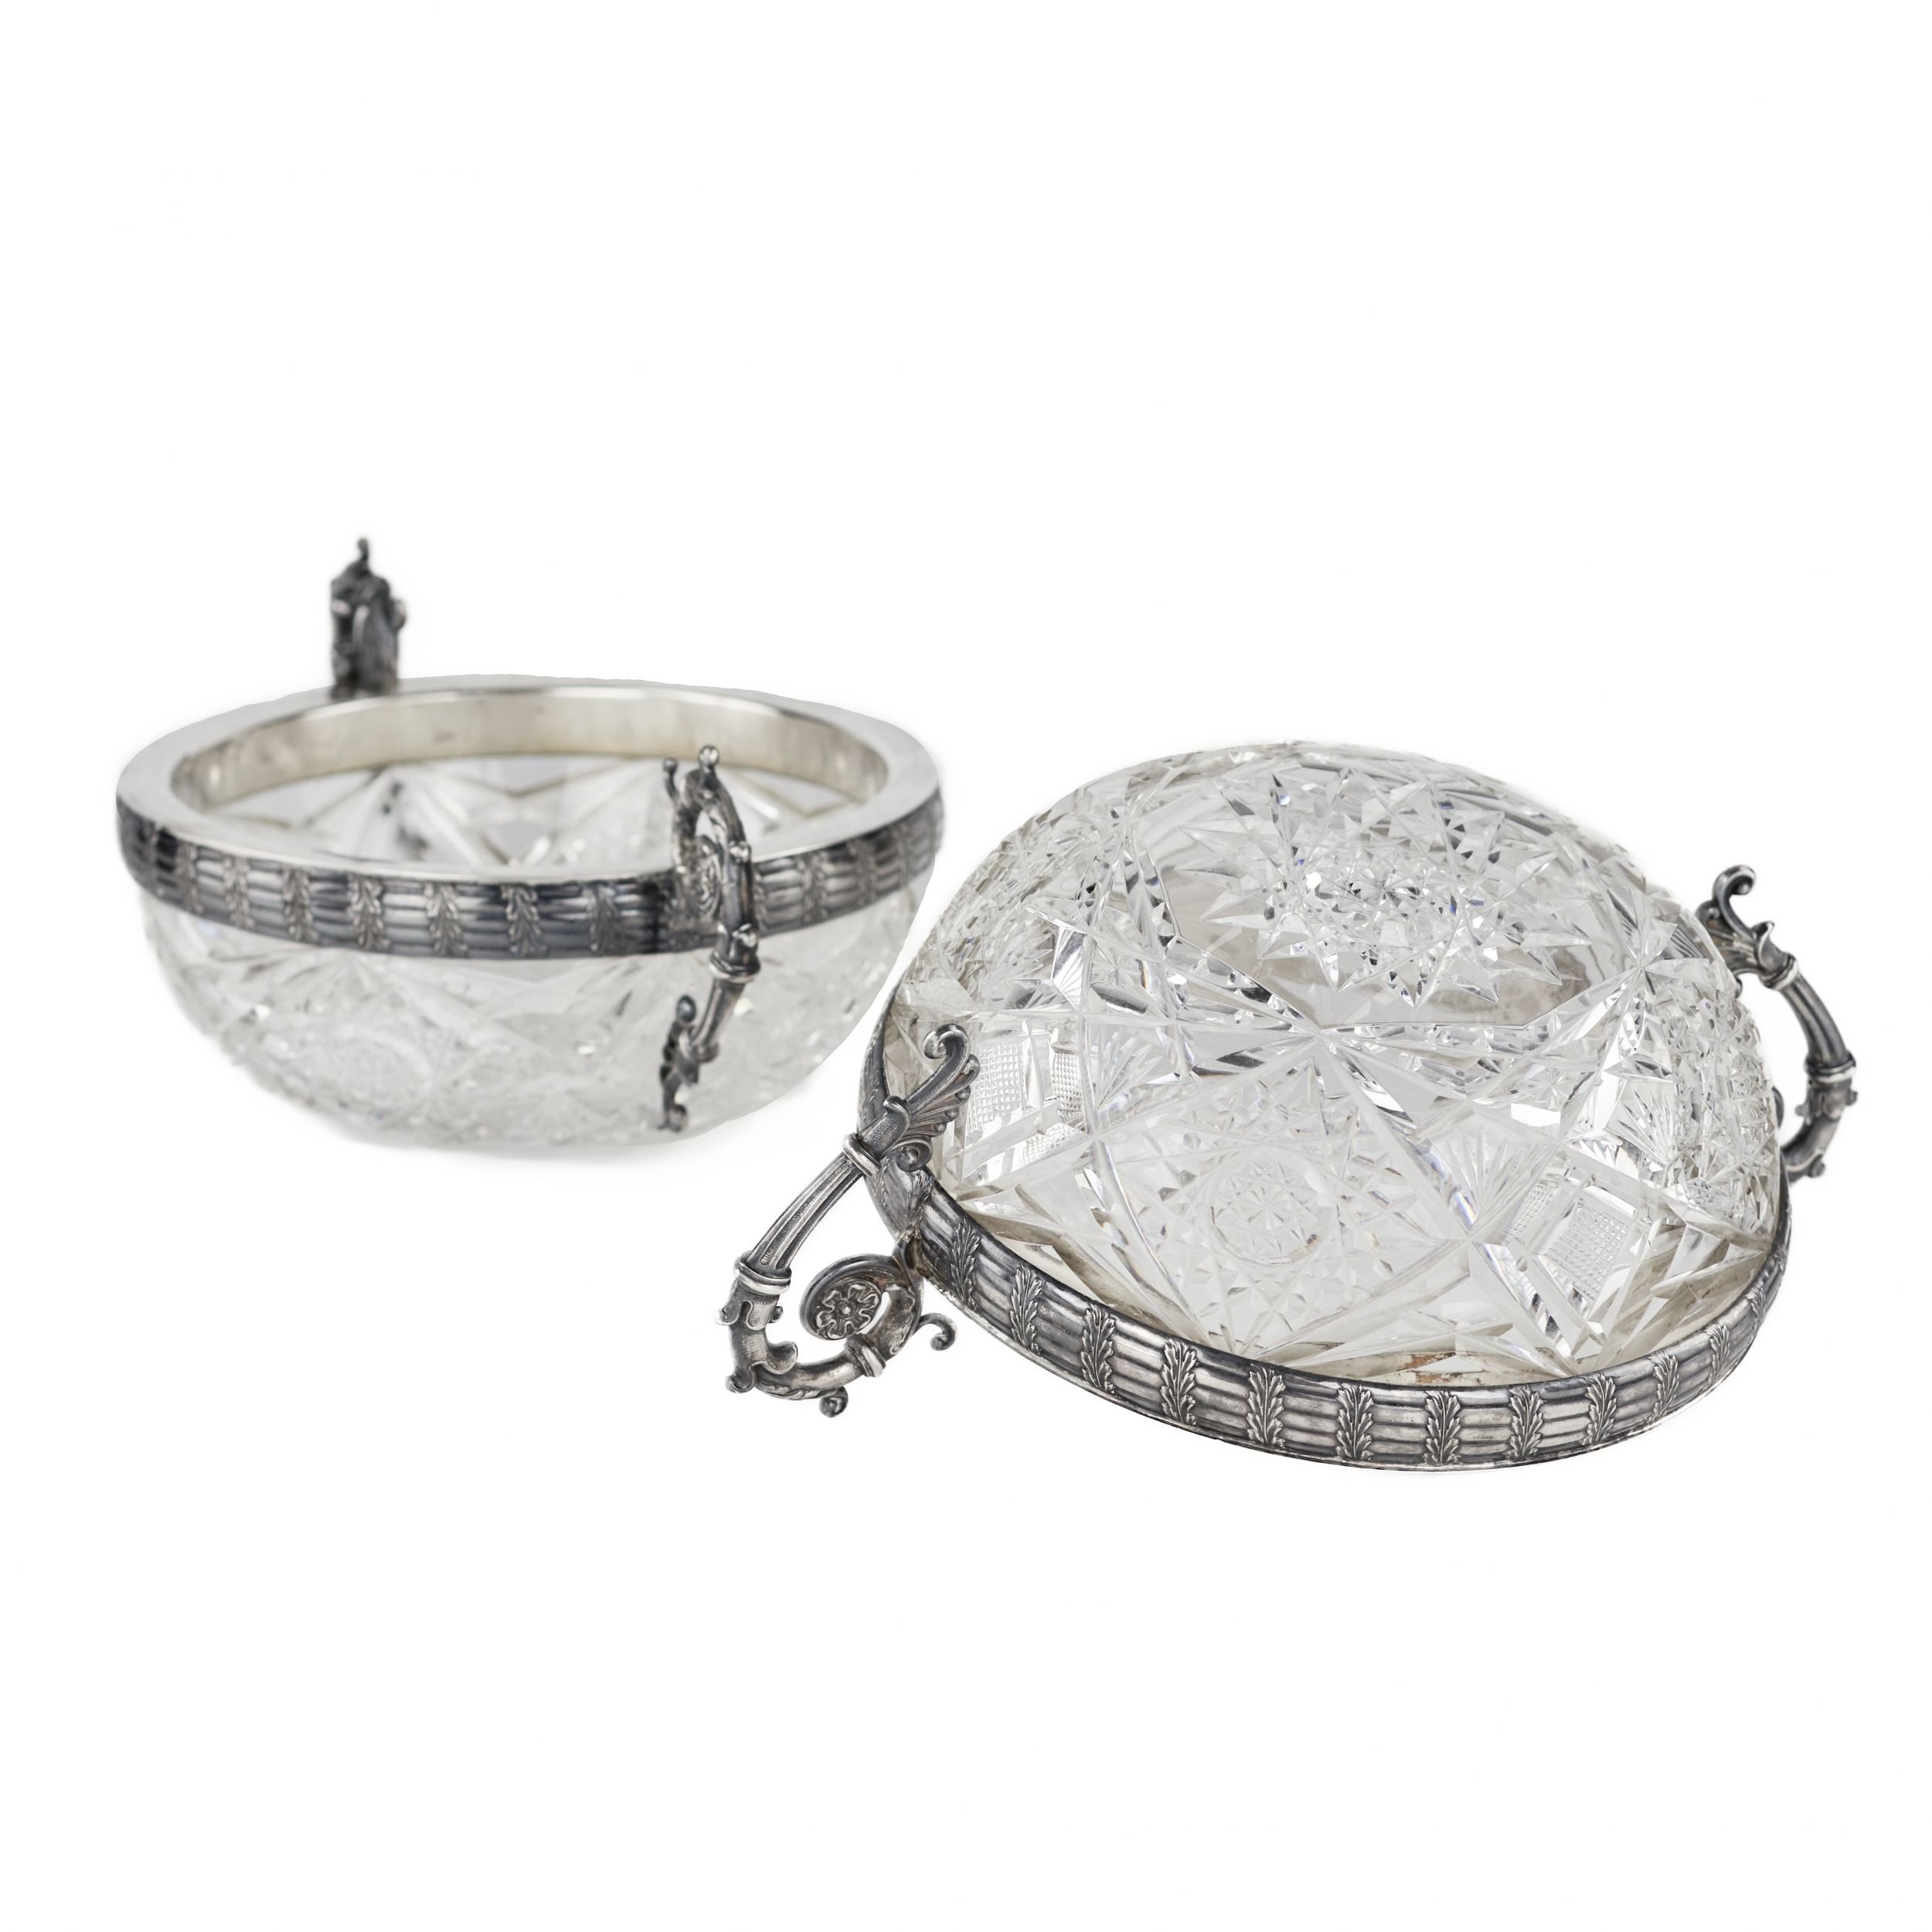 Pair of crystal candy bowls with silver. 15 Artel. Russia. 1908-1917 - Image 5 of 6